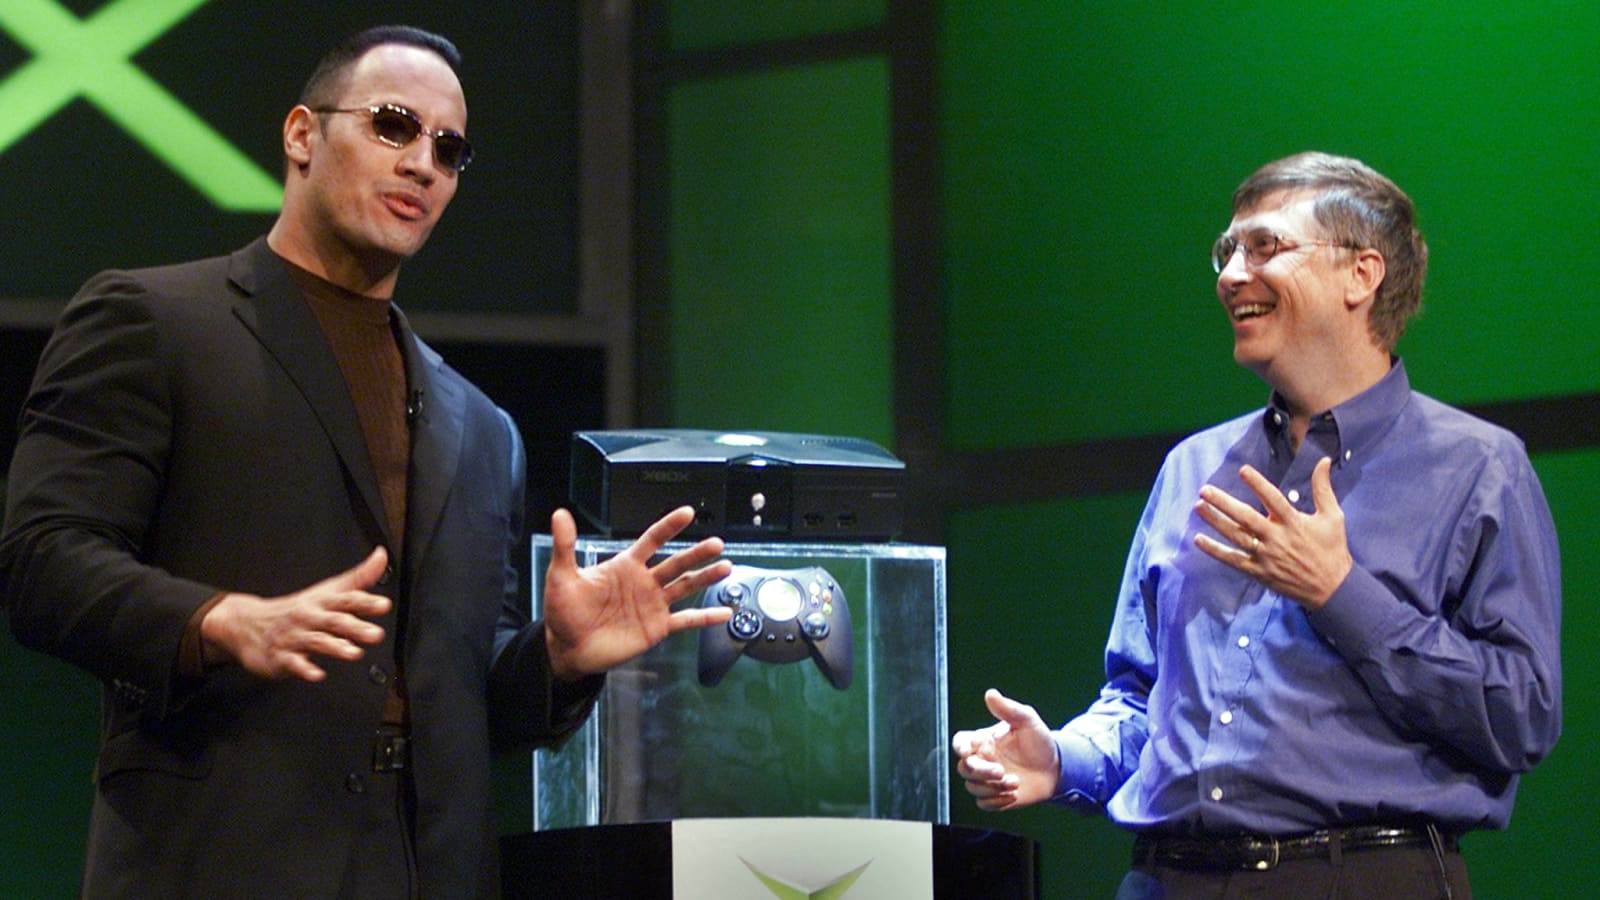 Xbox Reveal The Rock and Bill Gates 